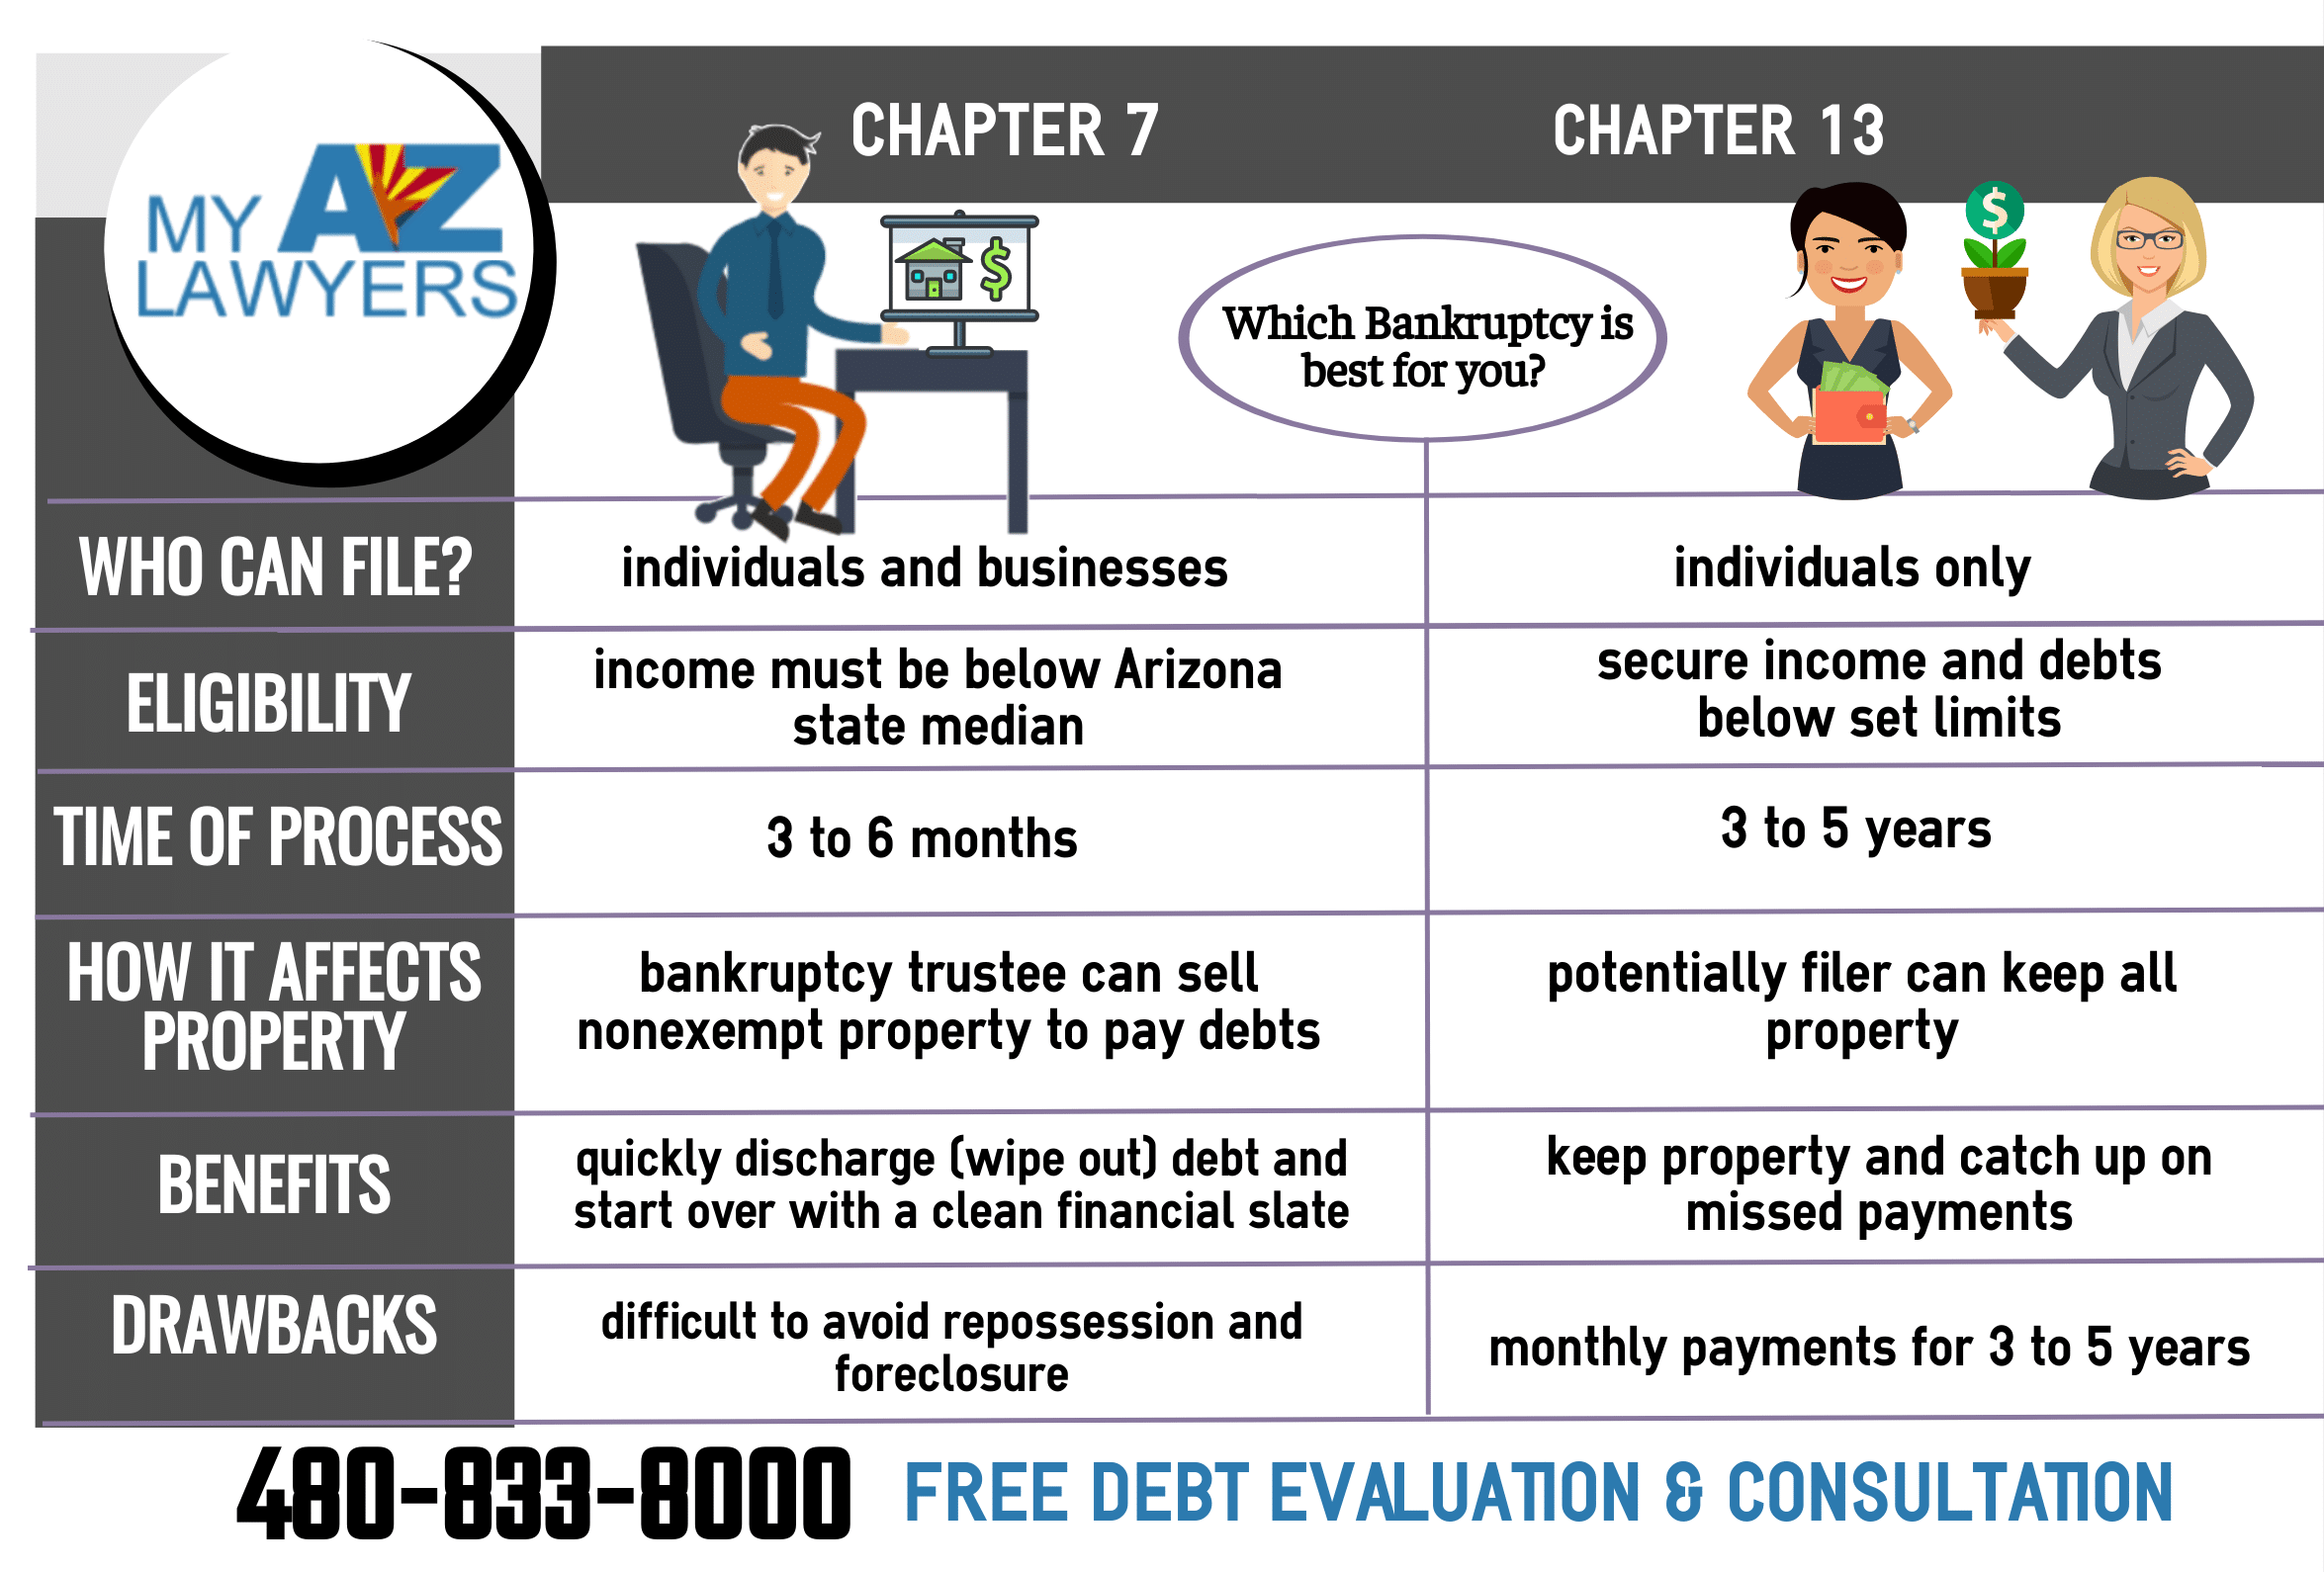 Avondale Bankruptcy Attorneys, infographic: Chapter 13 Arizona bankruptcy vs. Chapter 7 Arizona bankruptcy